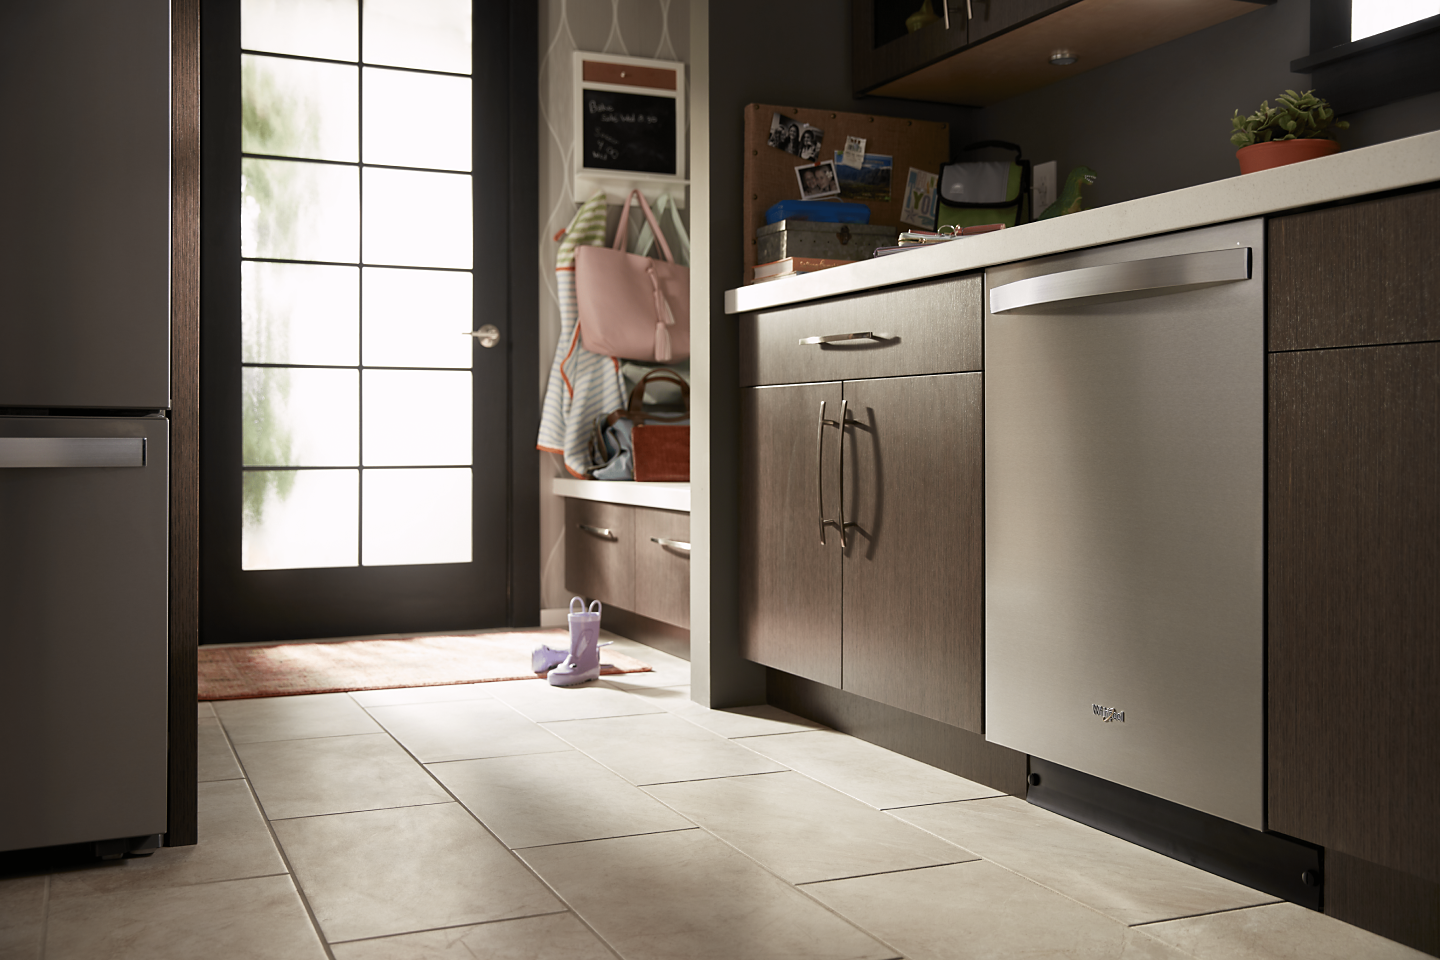 Stainless steel Whirlpool® top control dishwasher in a kitchen